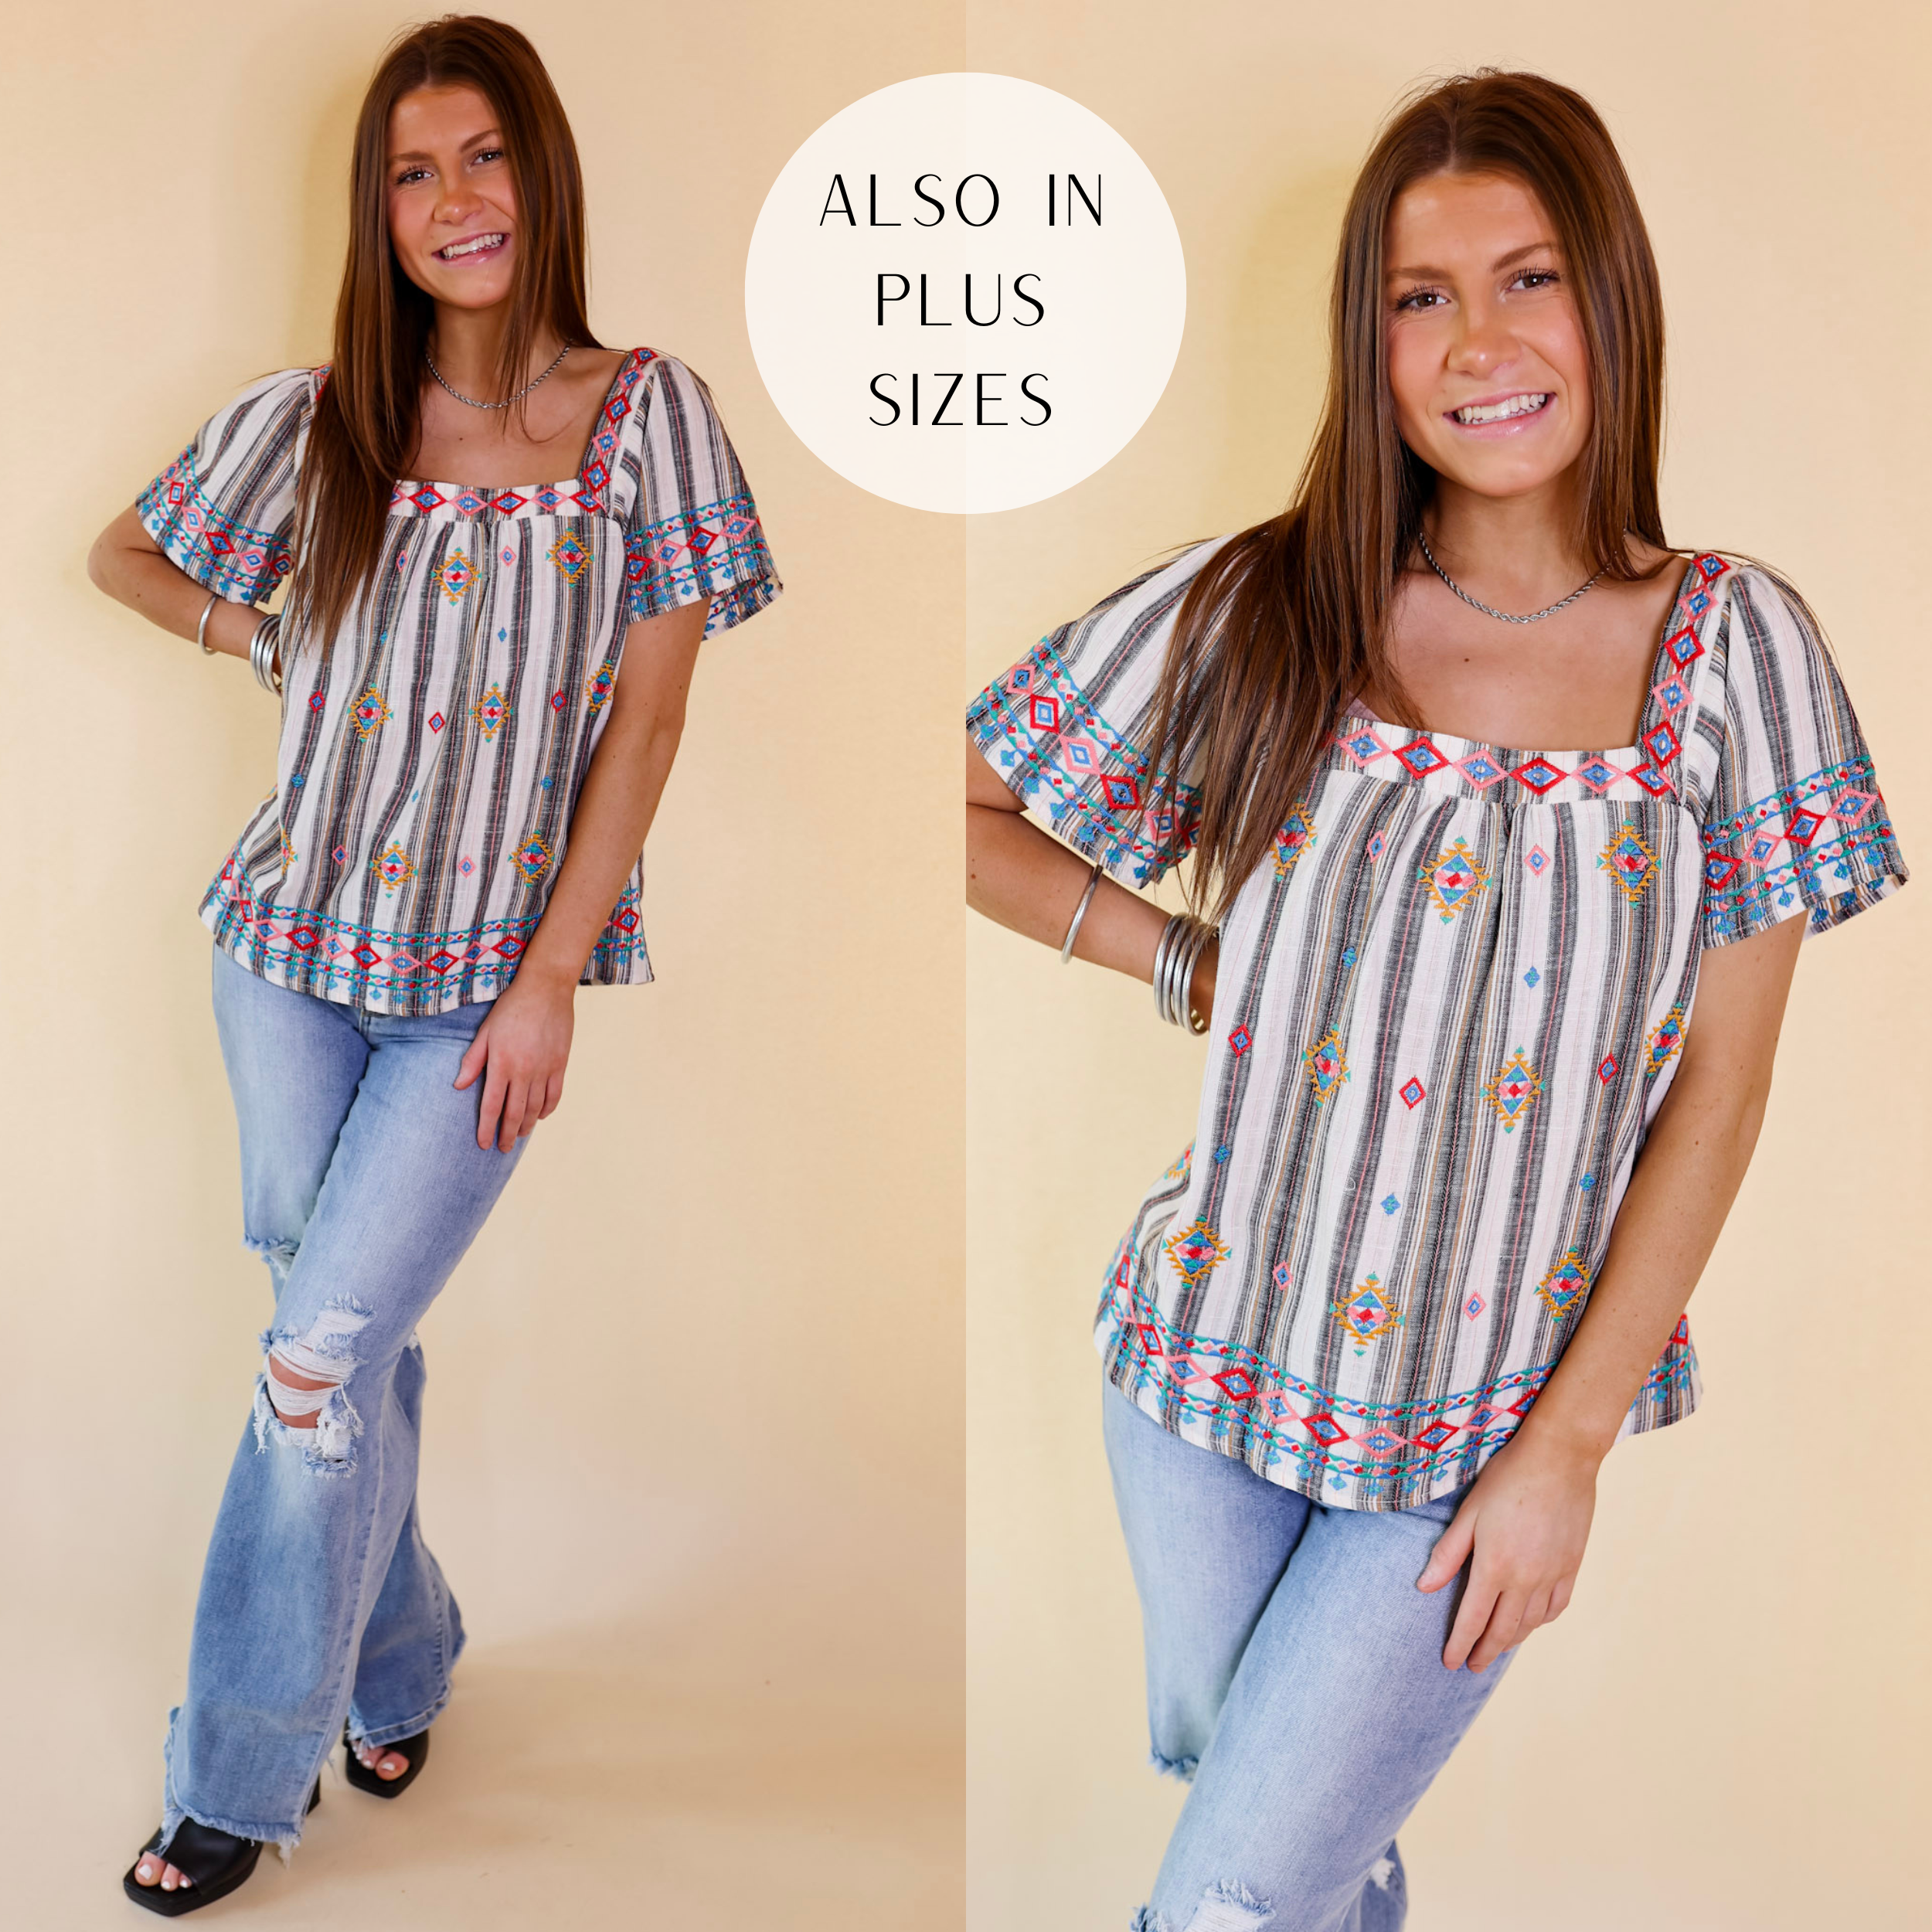 Model is wearing a black and ivory striped top with short sleeves, a square neckline, and tribal embroidery. Model has this top paired with distressed jeans, black heels, and silver jewelry.